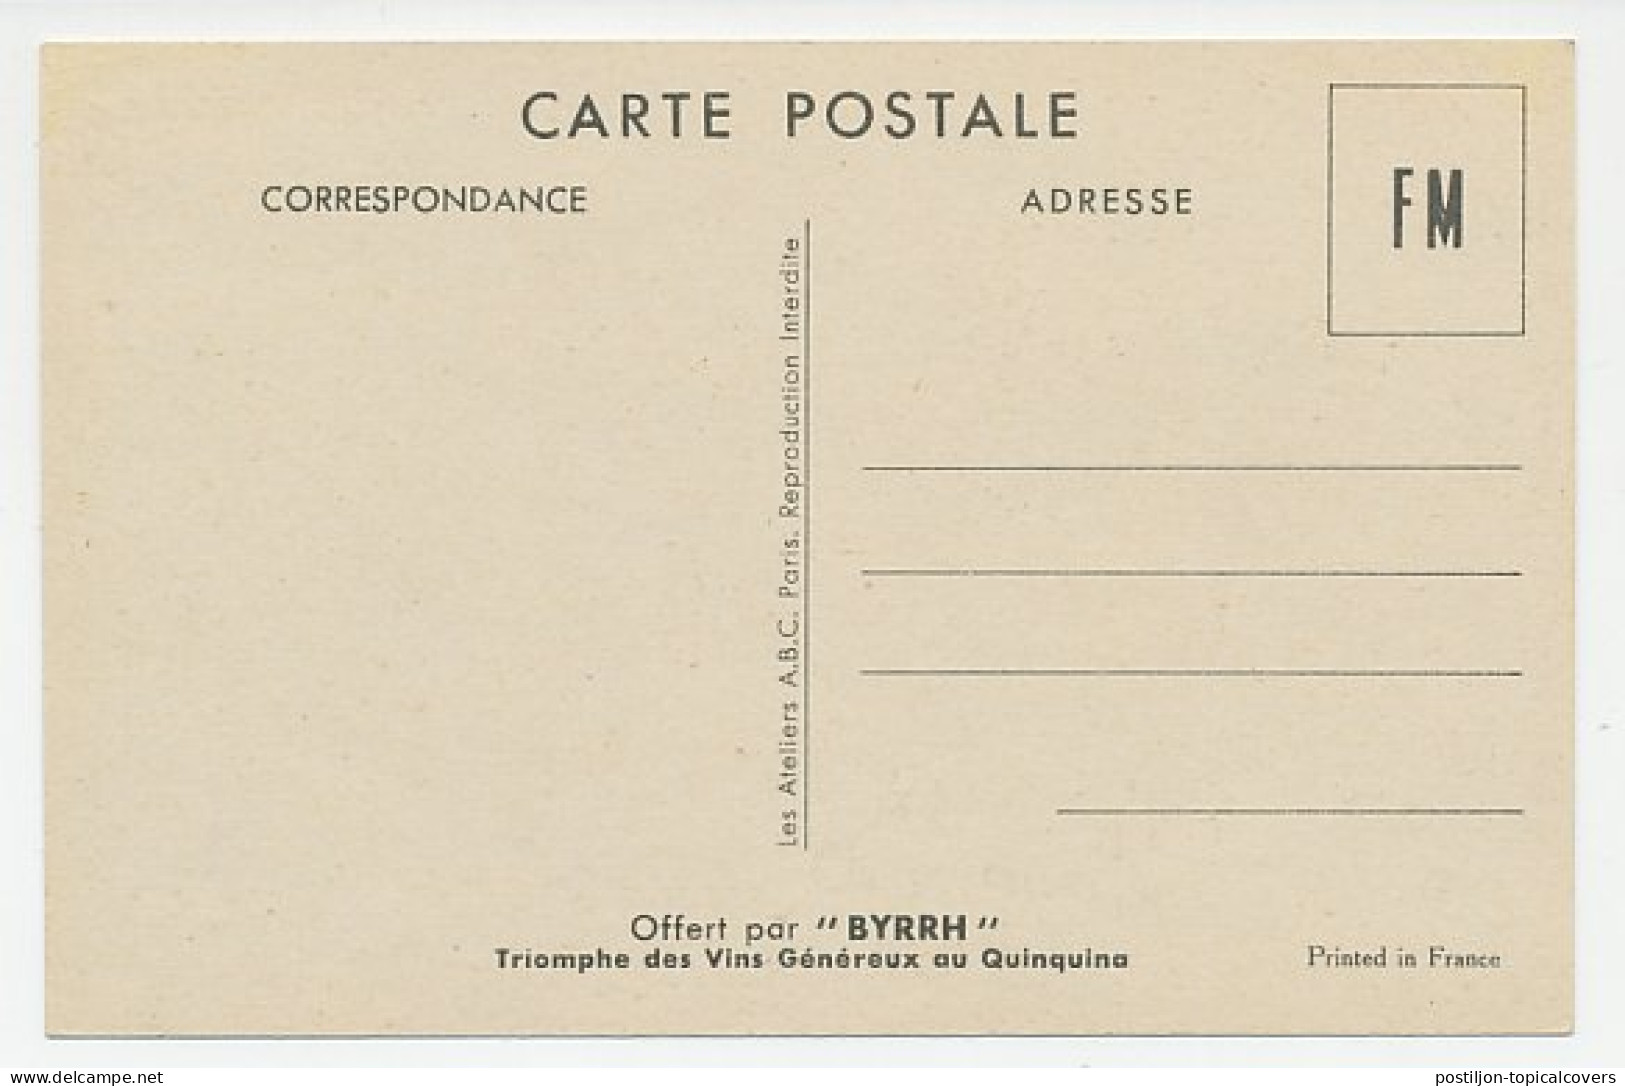 Military Service Card France Pipe Smoking - WWII - Tobacco